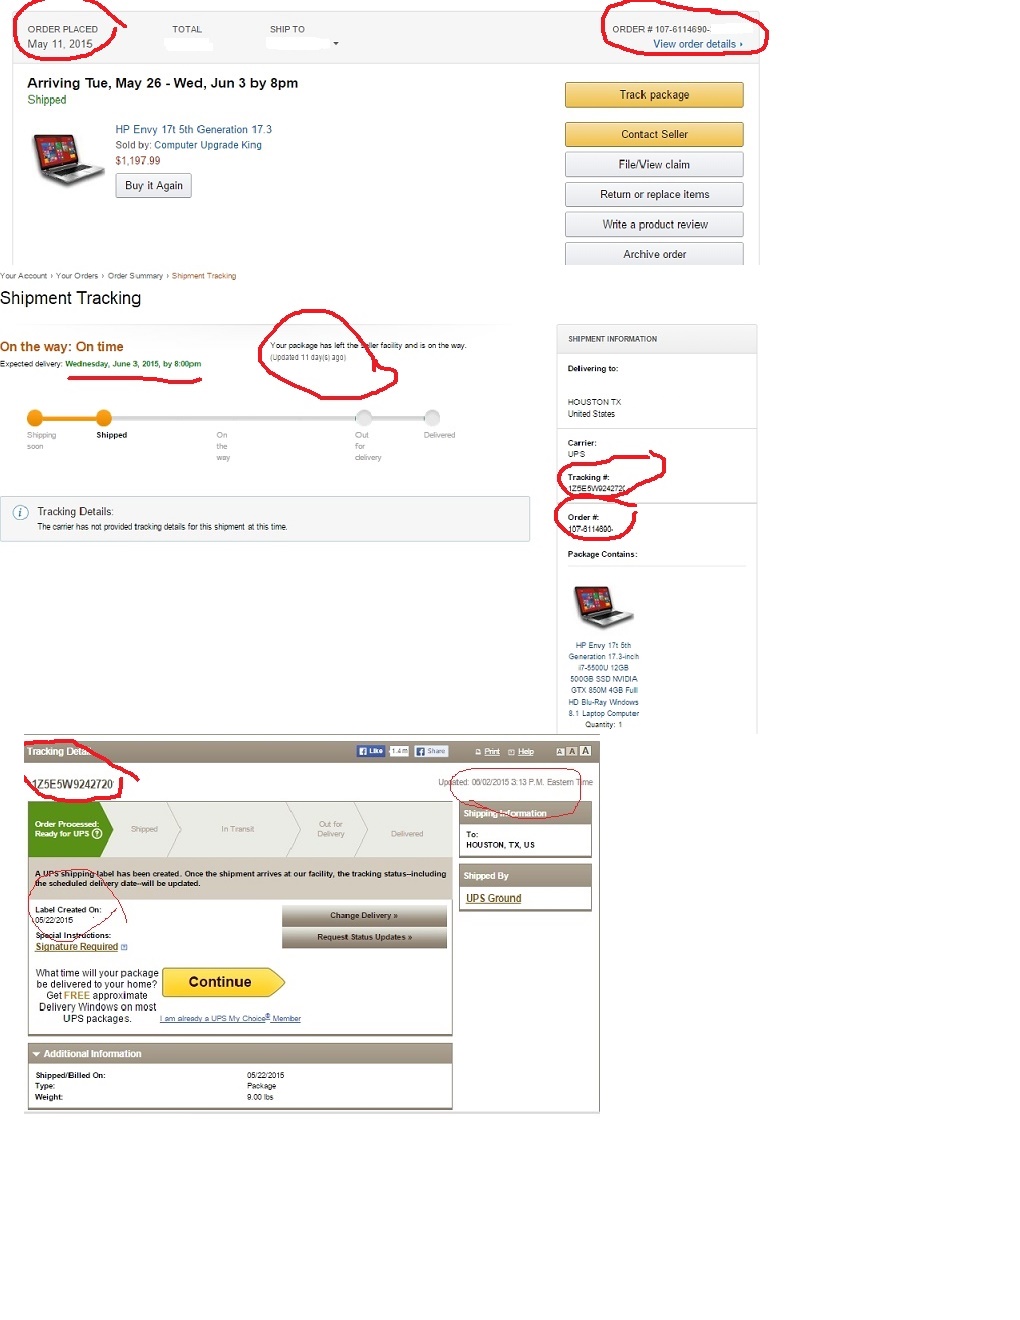 Three screenshot compiled indicating the date of order of said item (5/11/15) and UPS tracking info on 6/2/15 (sensitive info, such as name, address, complete order #, complete UPS tracking #, was rem